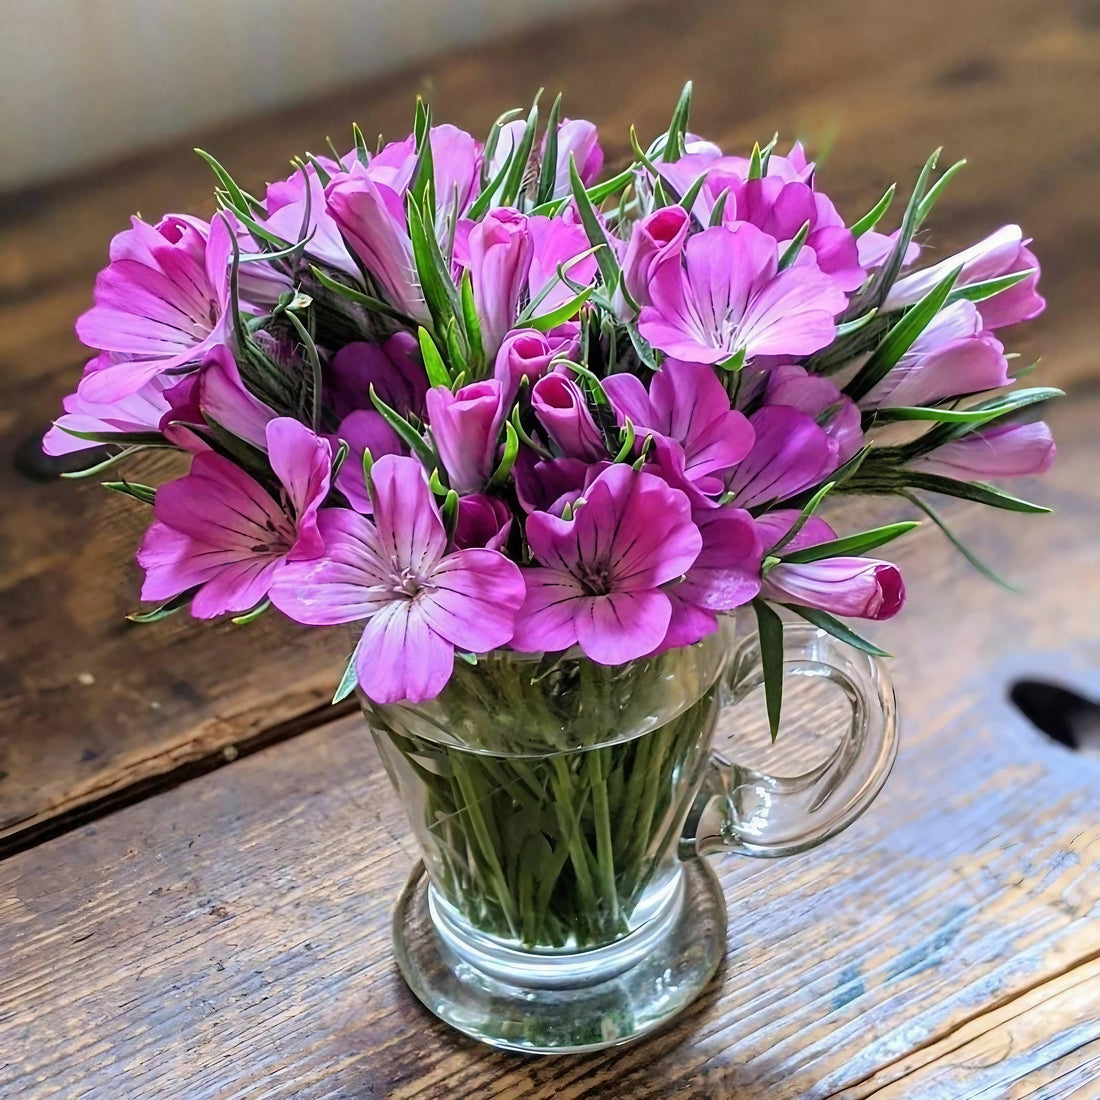 Arrangement of Corncockle flowers in a vase on a rustic wooden surface